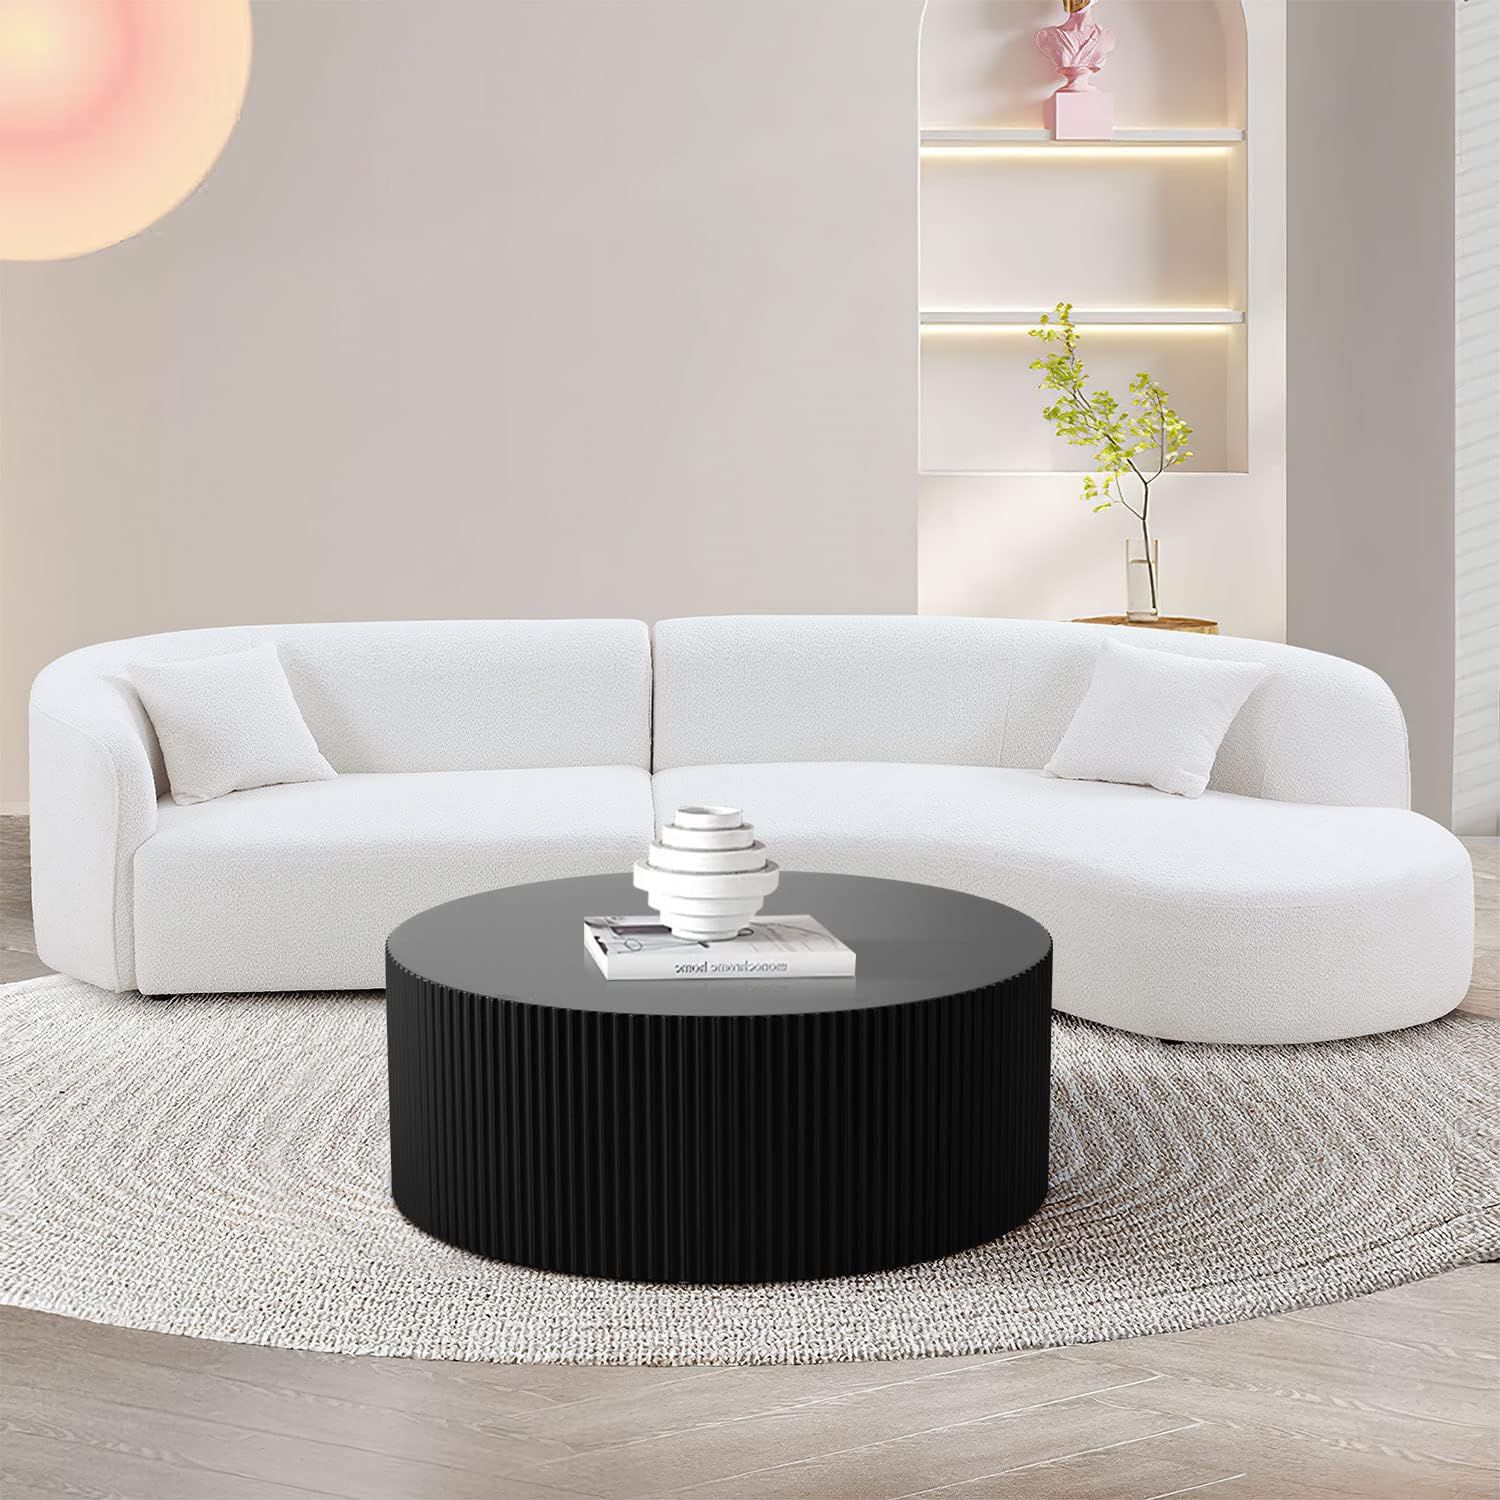 kevinplus Black Round Coffee Table Modern Side Table End Table for Living Room, Wood Circle Drum ... | Amazon (US)